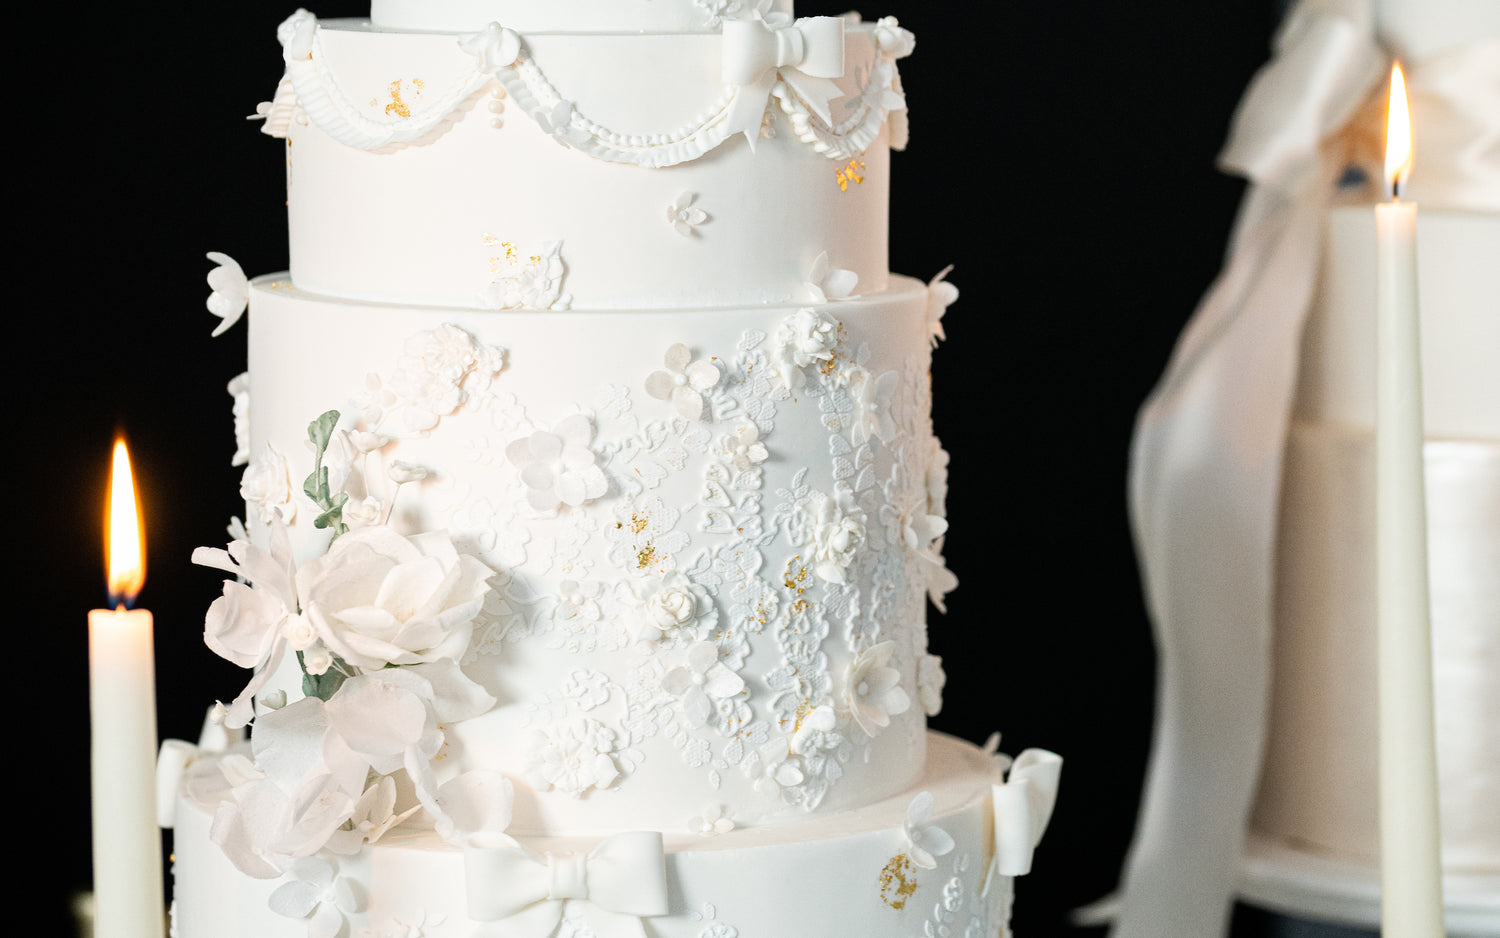 sugar nursery wedding cake in classic theme with lace and wafer paper flowers